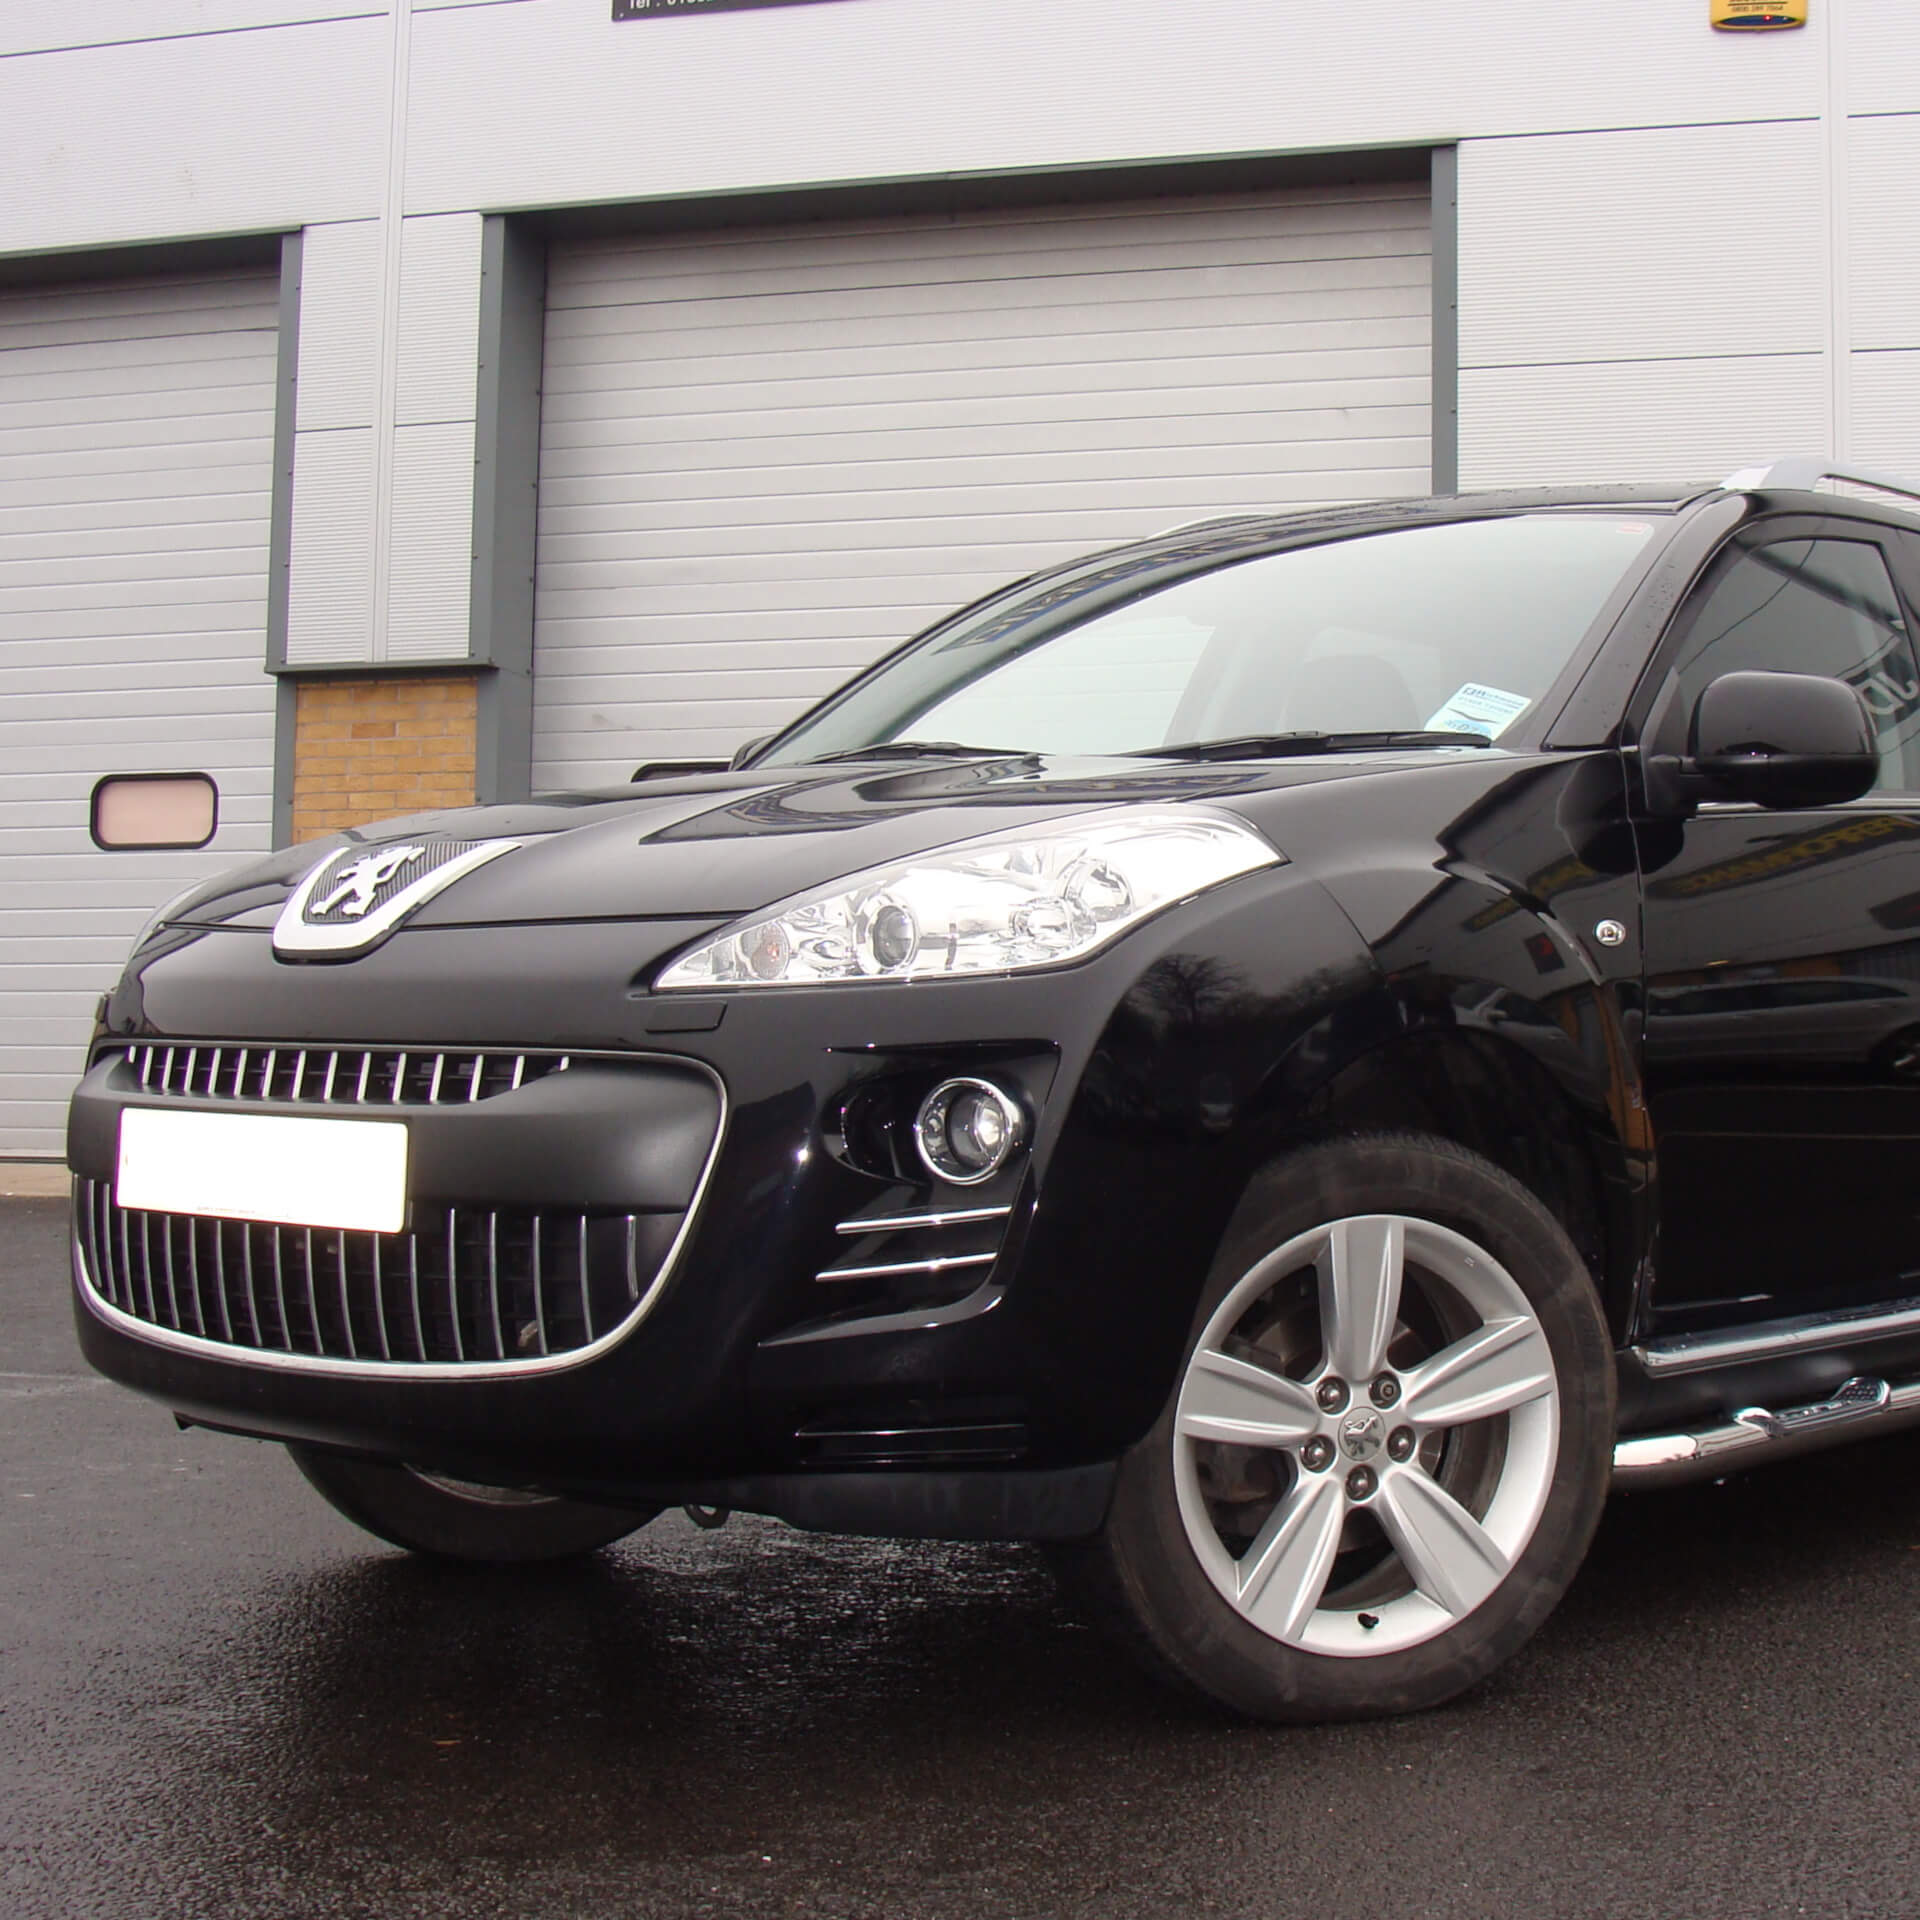 Direct4x4 accessories for Peugeot 4007 vehicles with a photo of a black Peugeot 4007 parked outside a industrial unit